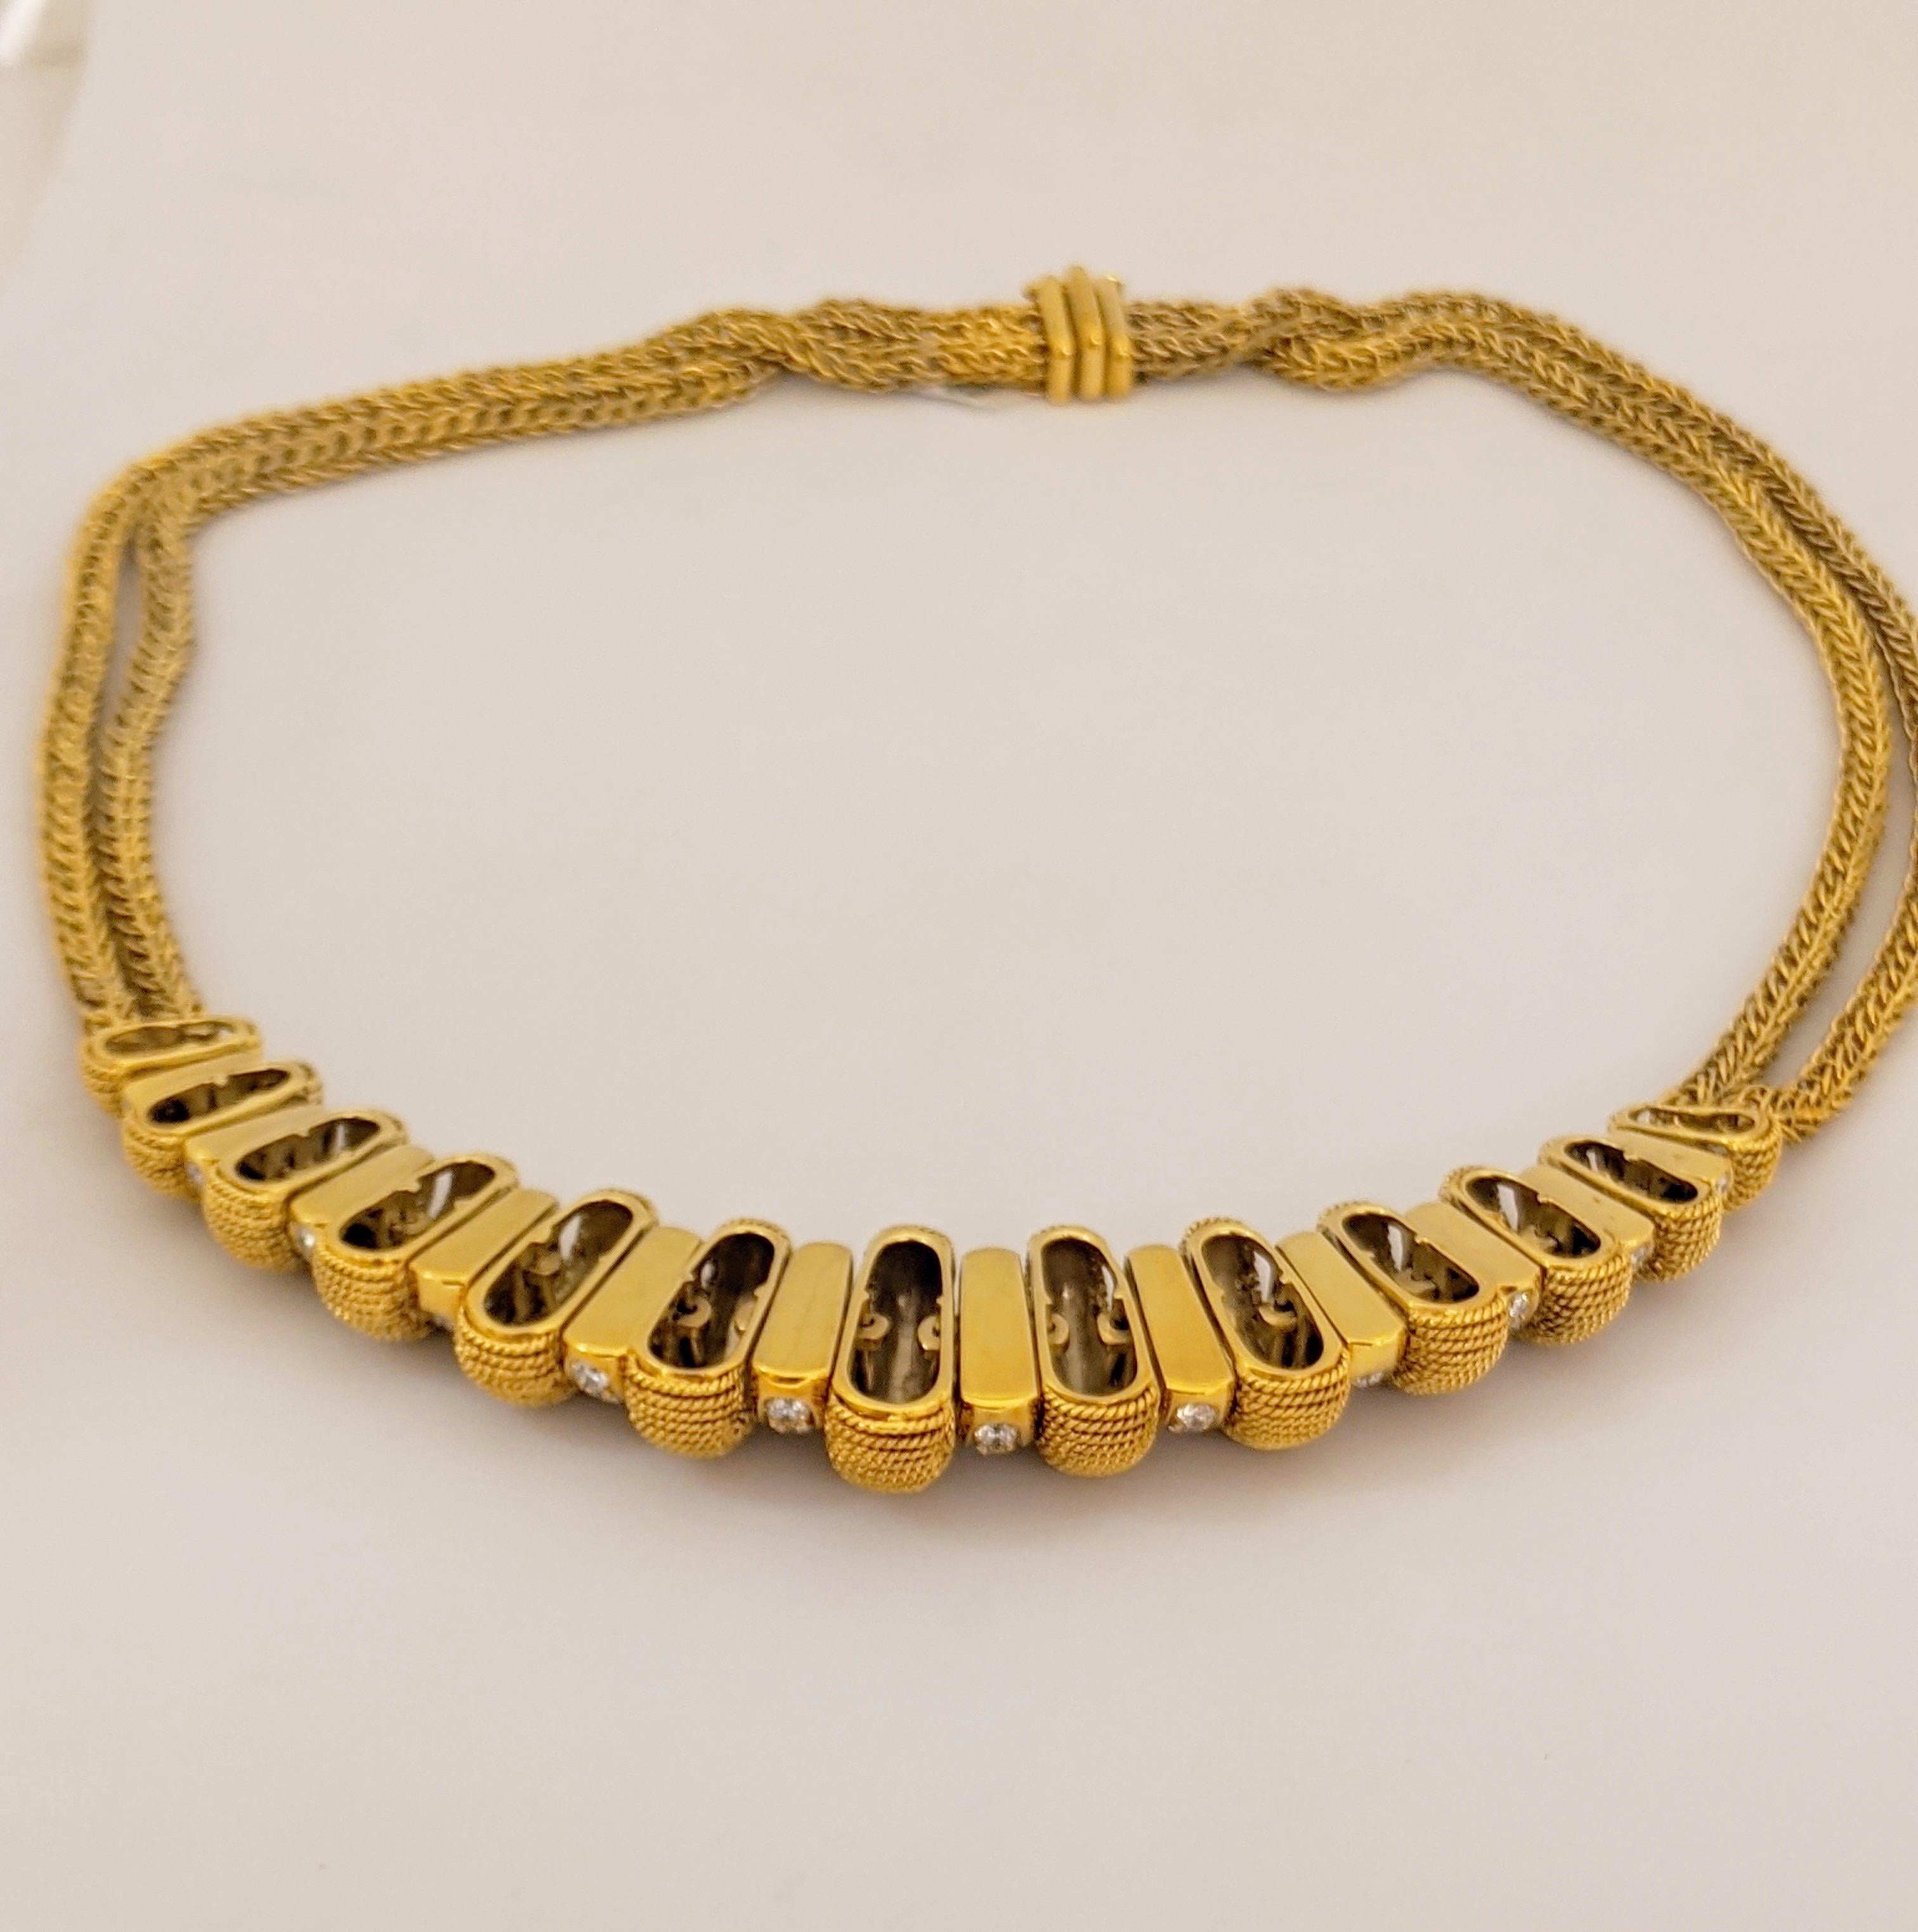 Cellini Jewelers NYC beautifully designed 18 karat yellow gold and diamond necklace. The front portion of this necklace is designed with  6